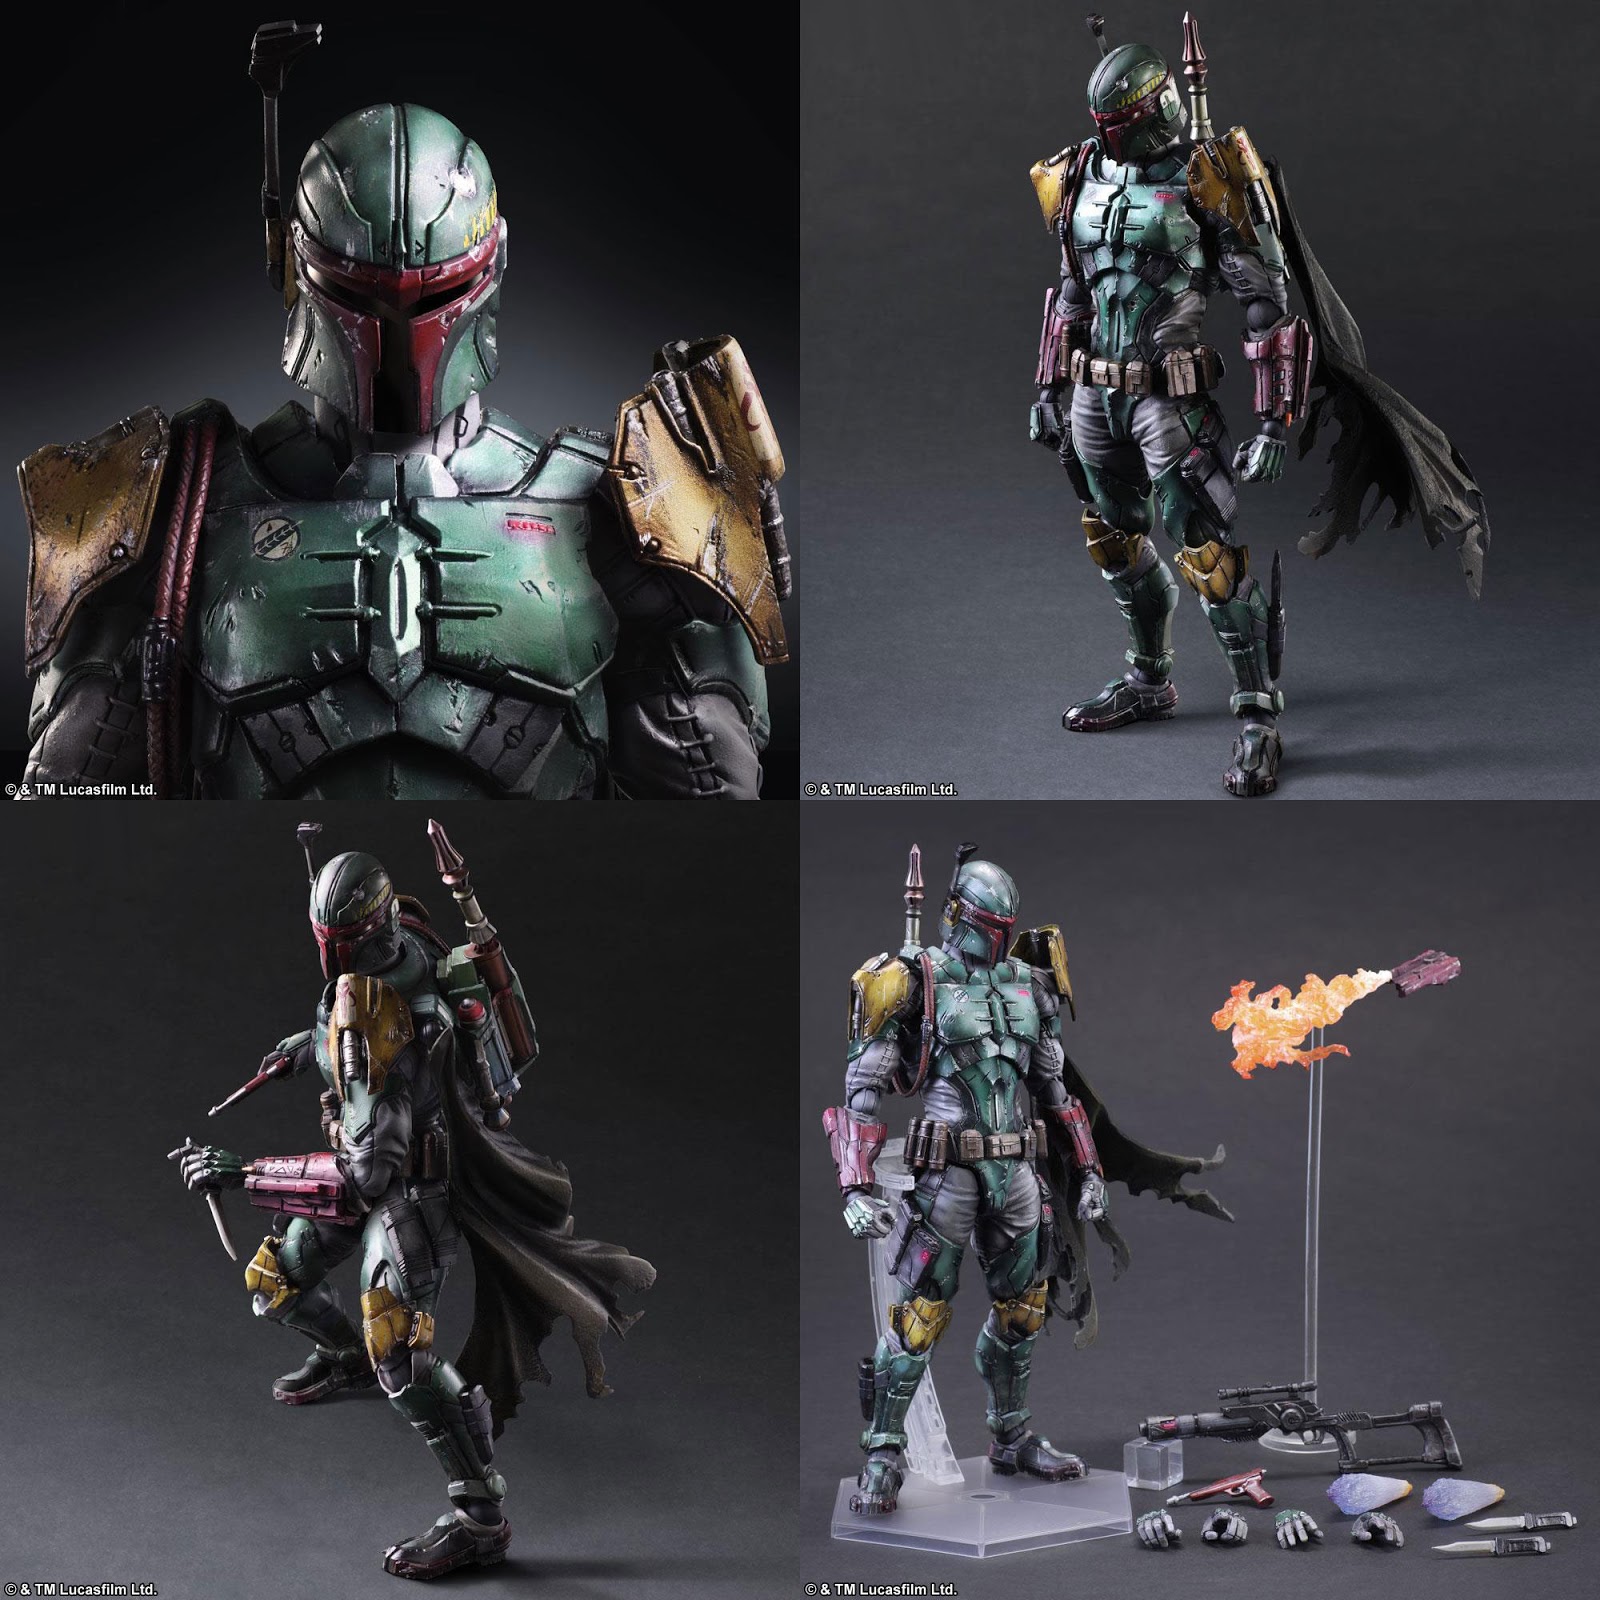 Star Wars Variant Play Arts Kai from SQUARE ENIX - Boba Star Wars Variant Play Arts Kai From SQUARE ENIX 2